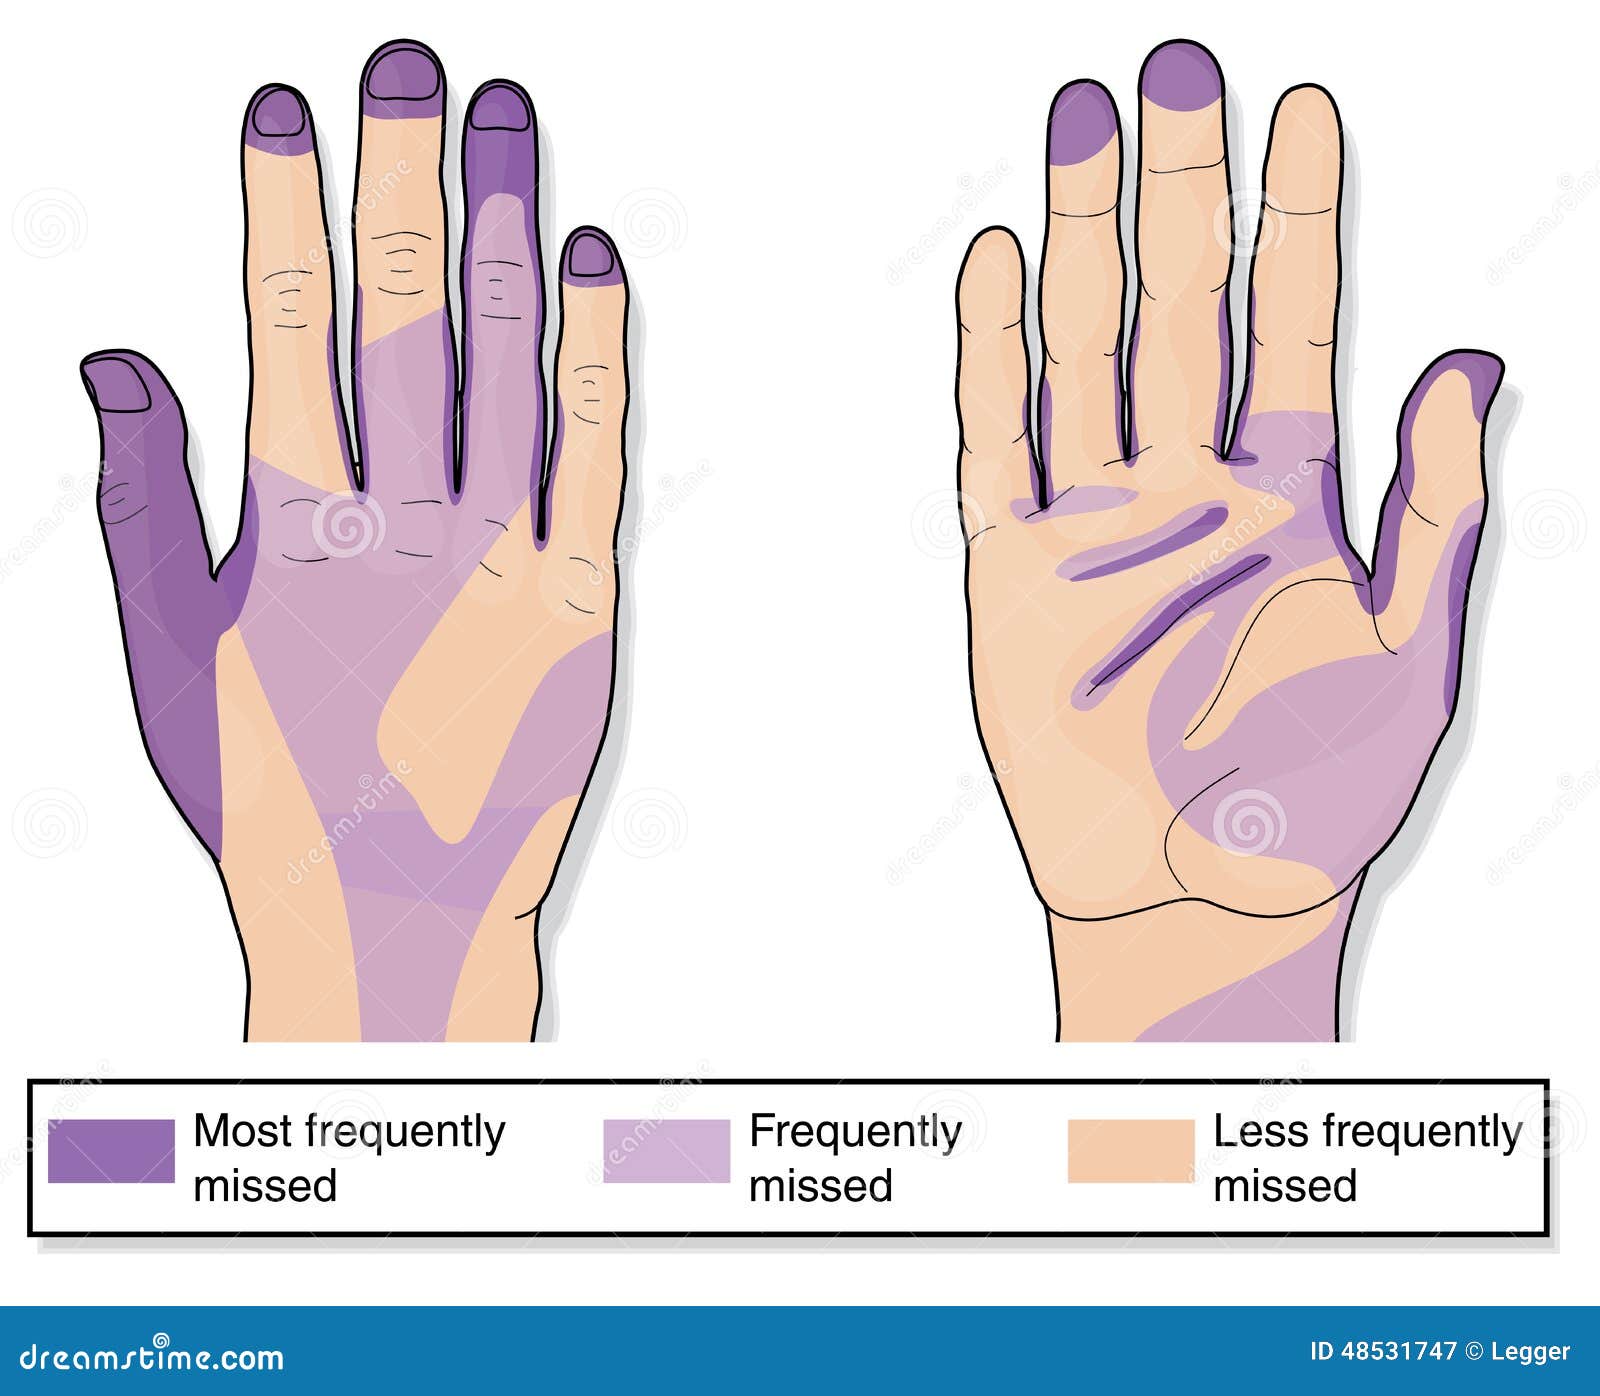 frequently missed areas when cleaning hands